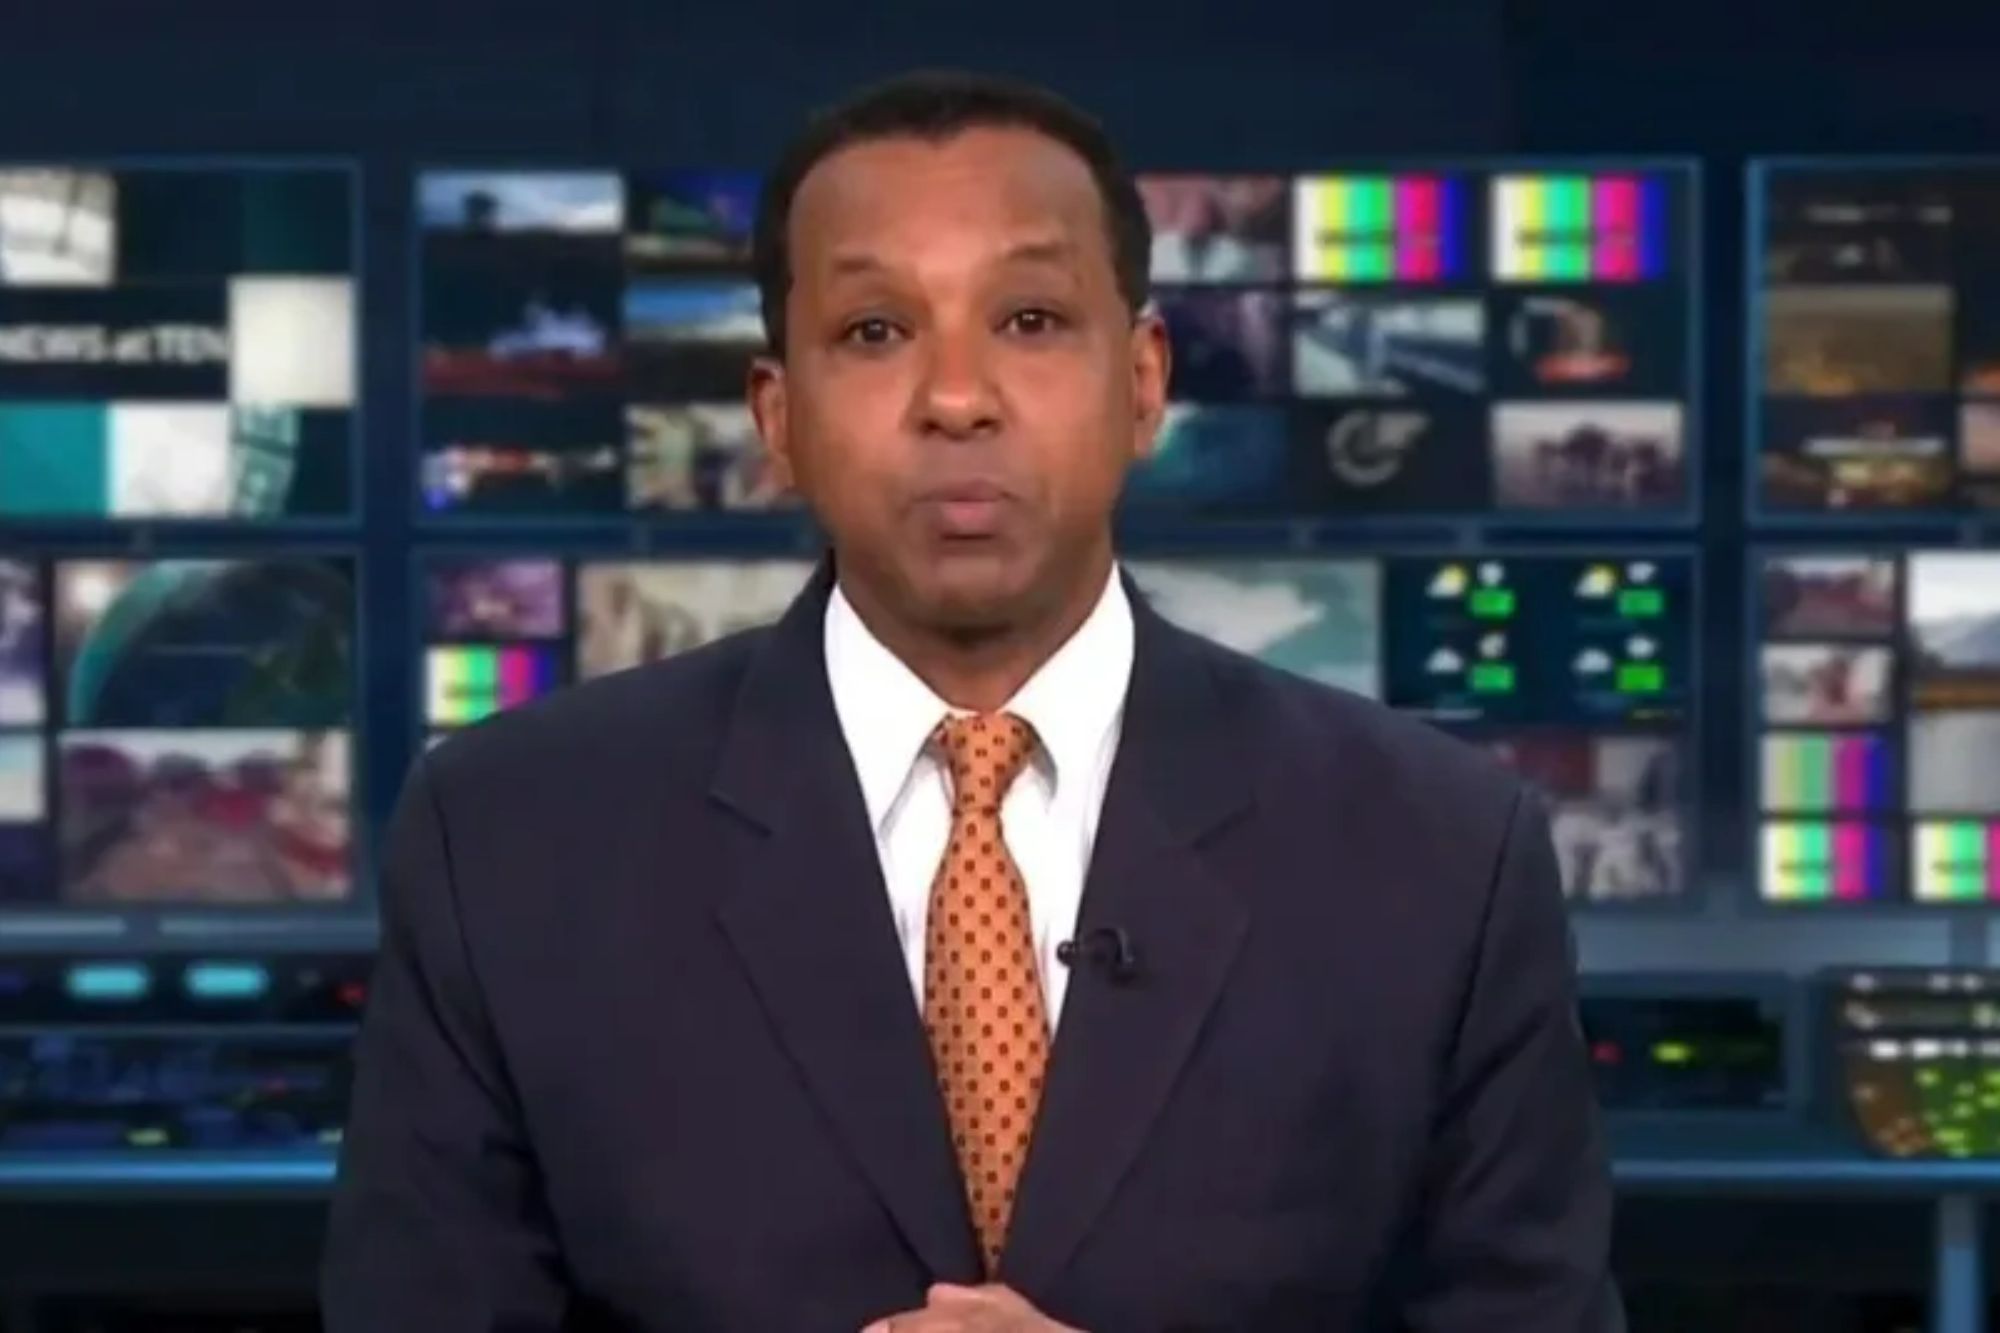 ITV axes News repeat after viewers' concerns over 'struggling' presenter